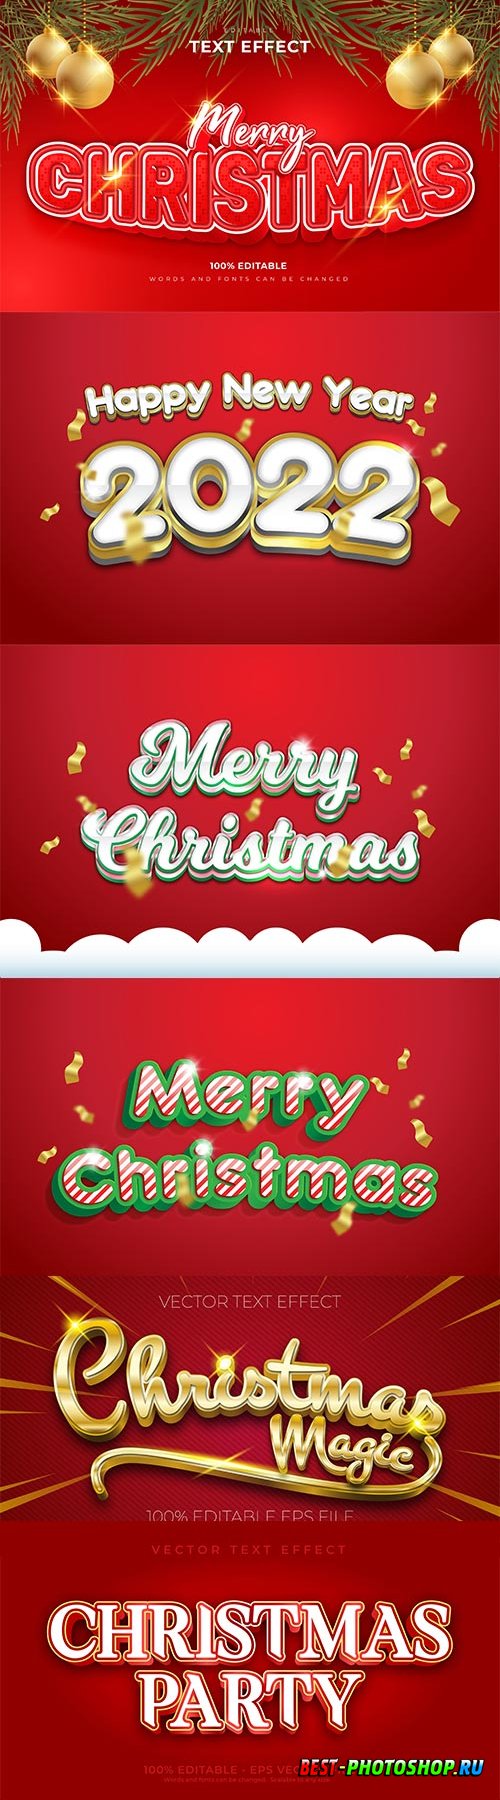 2022 New year and christmas editable text effect vector vol 27